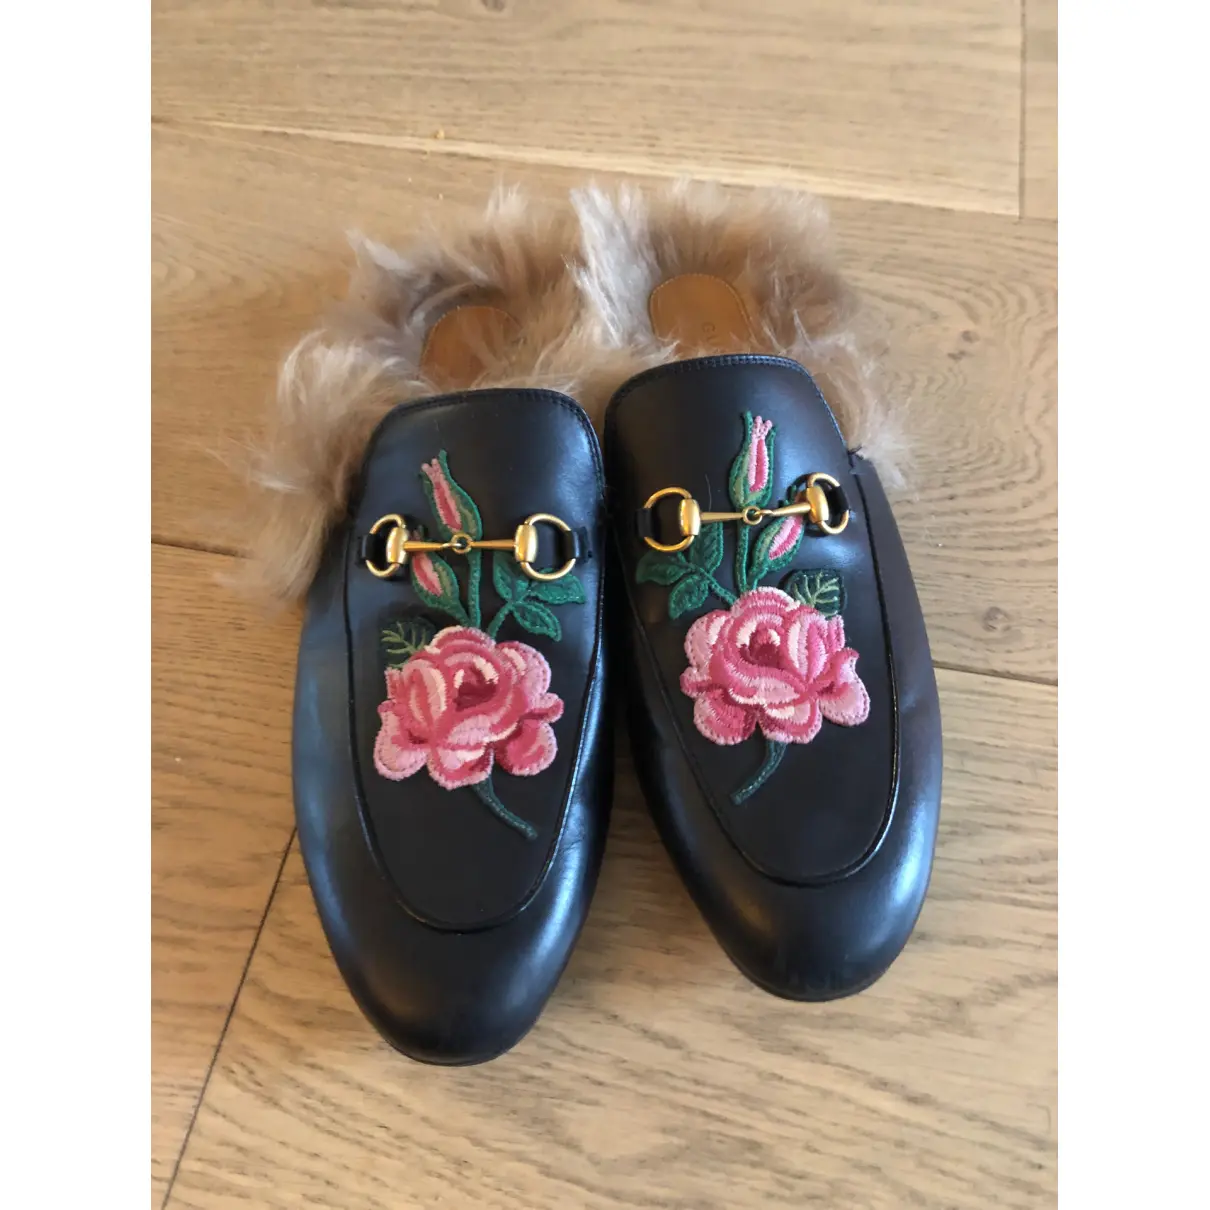 Buy Gucci Princetown leather sandals online